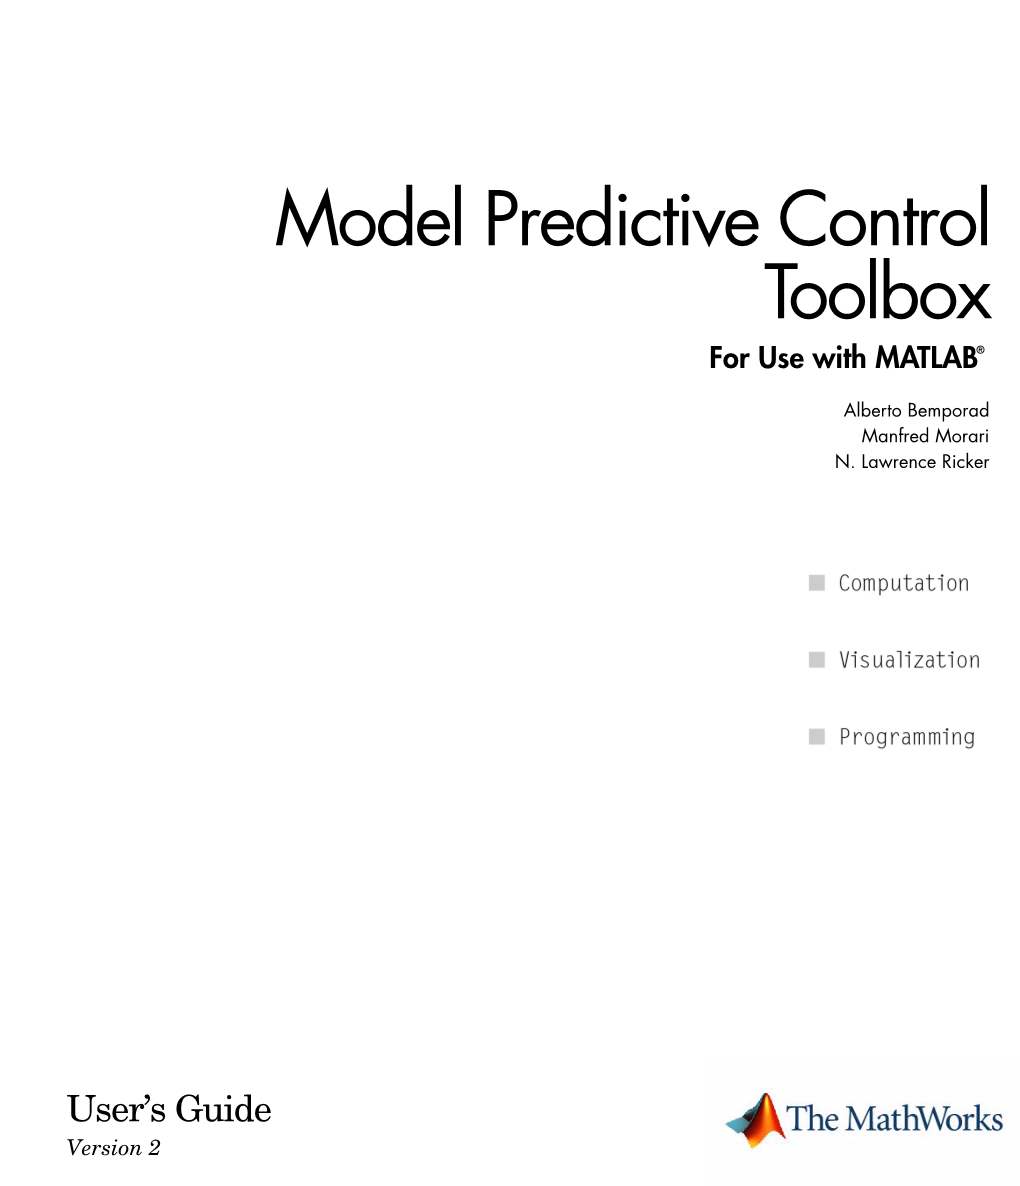 Model Predictive Control Toolbox for Use with MATLAB®